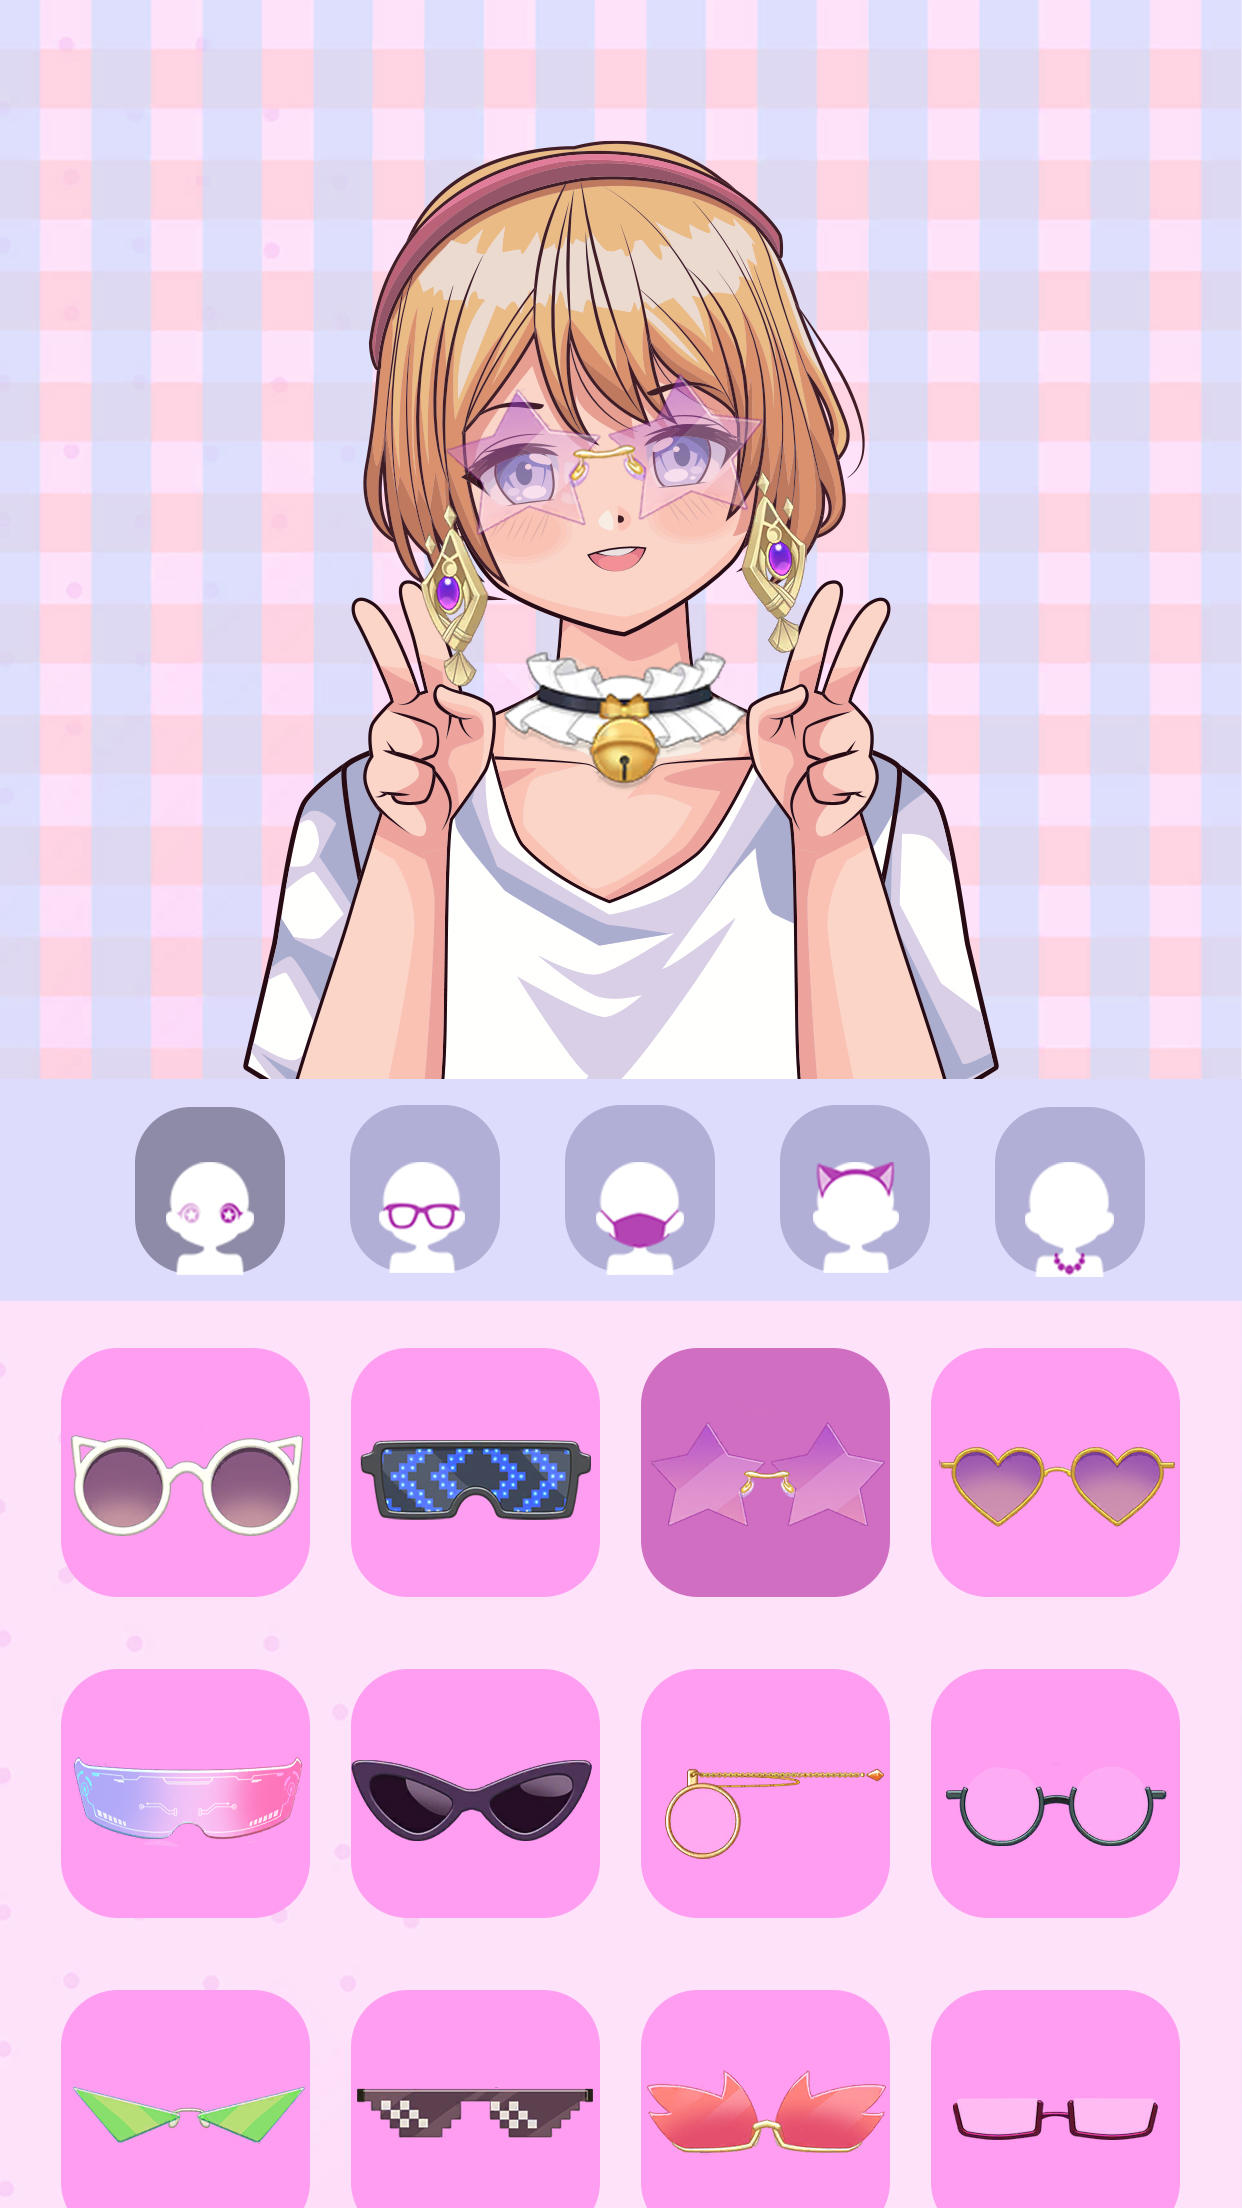 Anime Avatar Maker 2::Appstore for Android